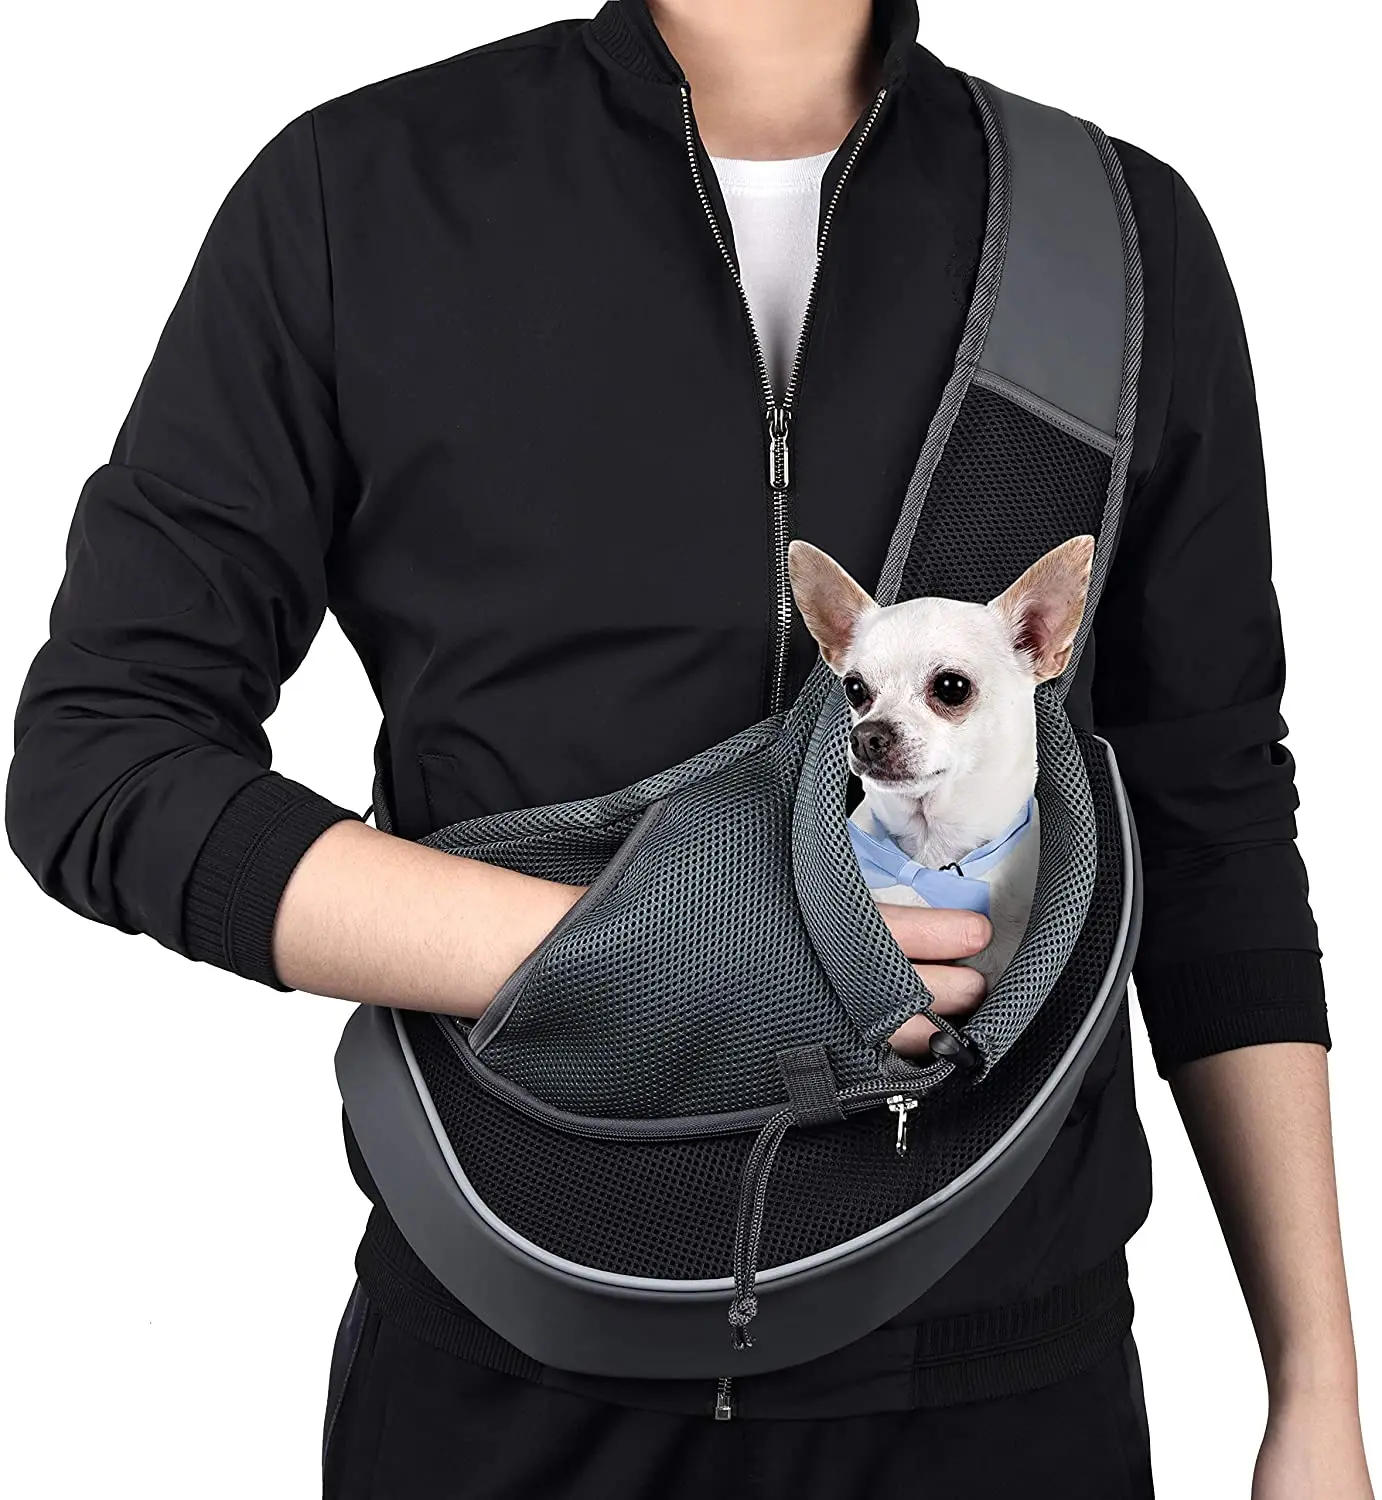 L , Brown/Grey 7-15lbs sPETyle Hands Free Reversible Pet Bag Sling Carrier with Adjustable Strap for Small Dogs Puppies Cats Rabbits 